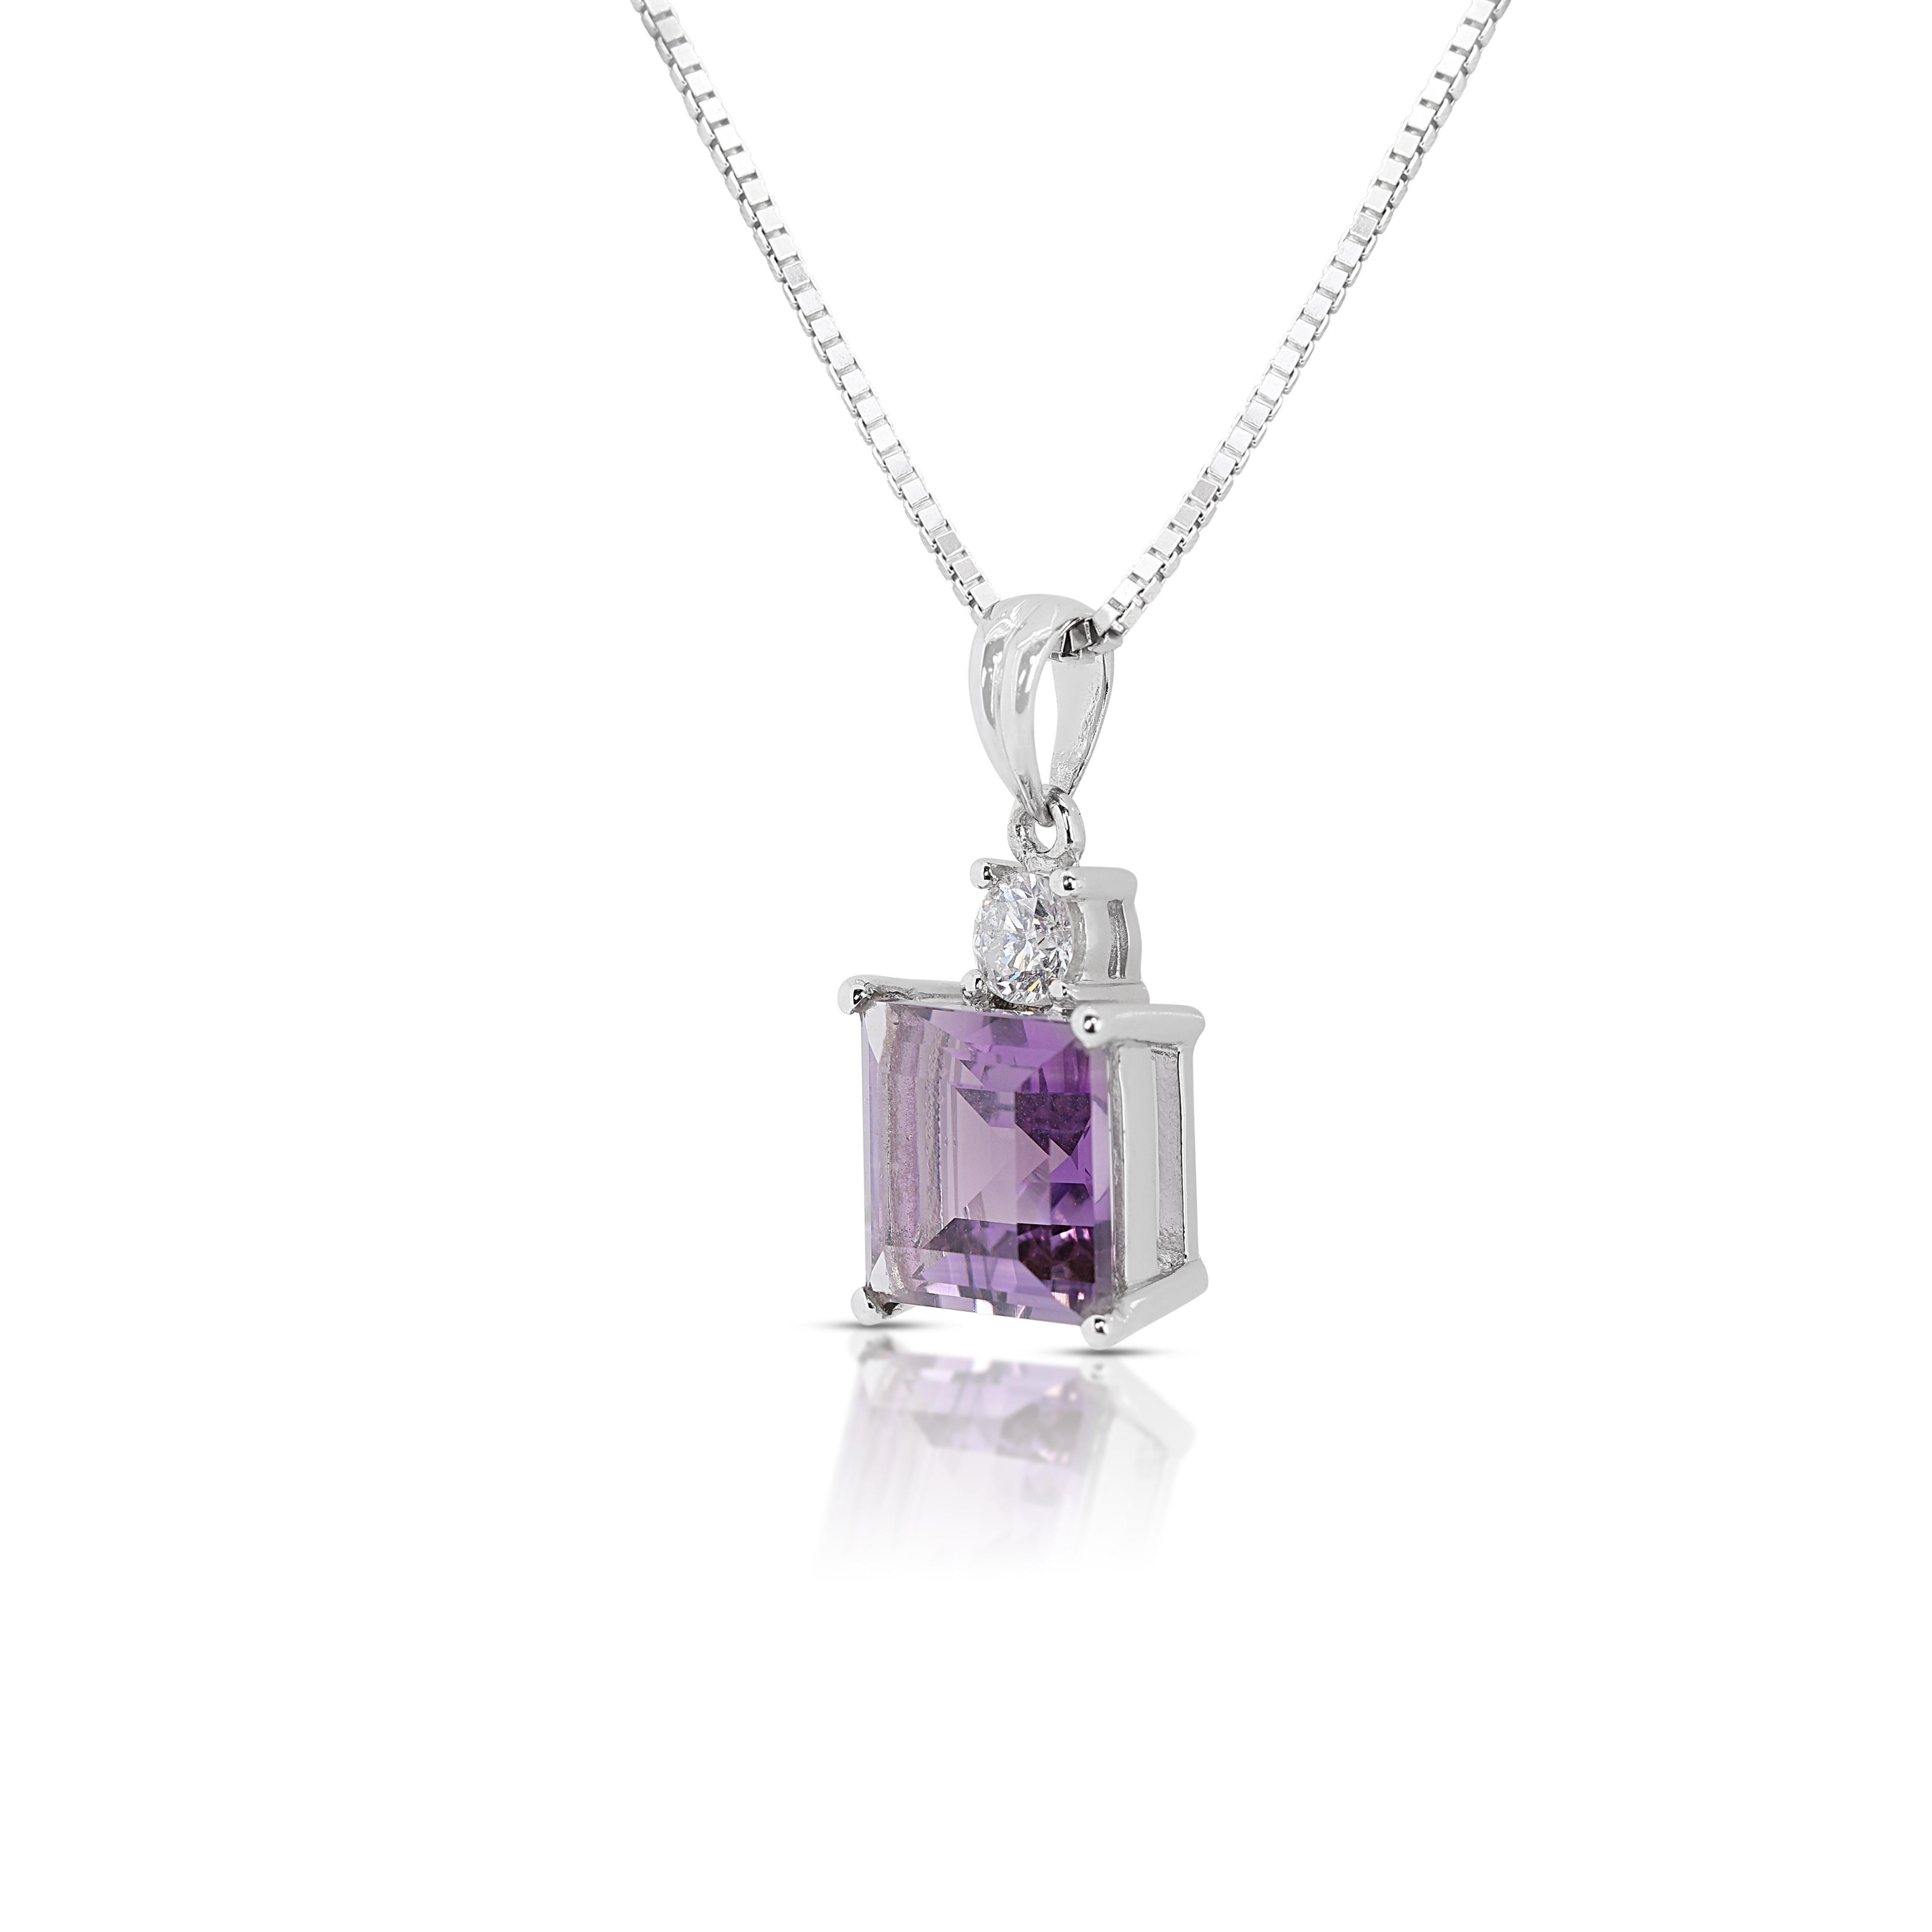 Square Cut Elegant 1.94ct Amethyst Pendant w/ Diamonds in 18K White Gold-Chain Not Included For Sale